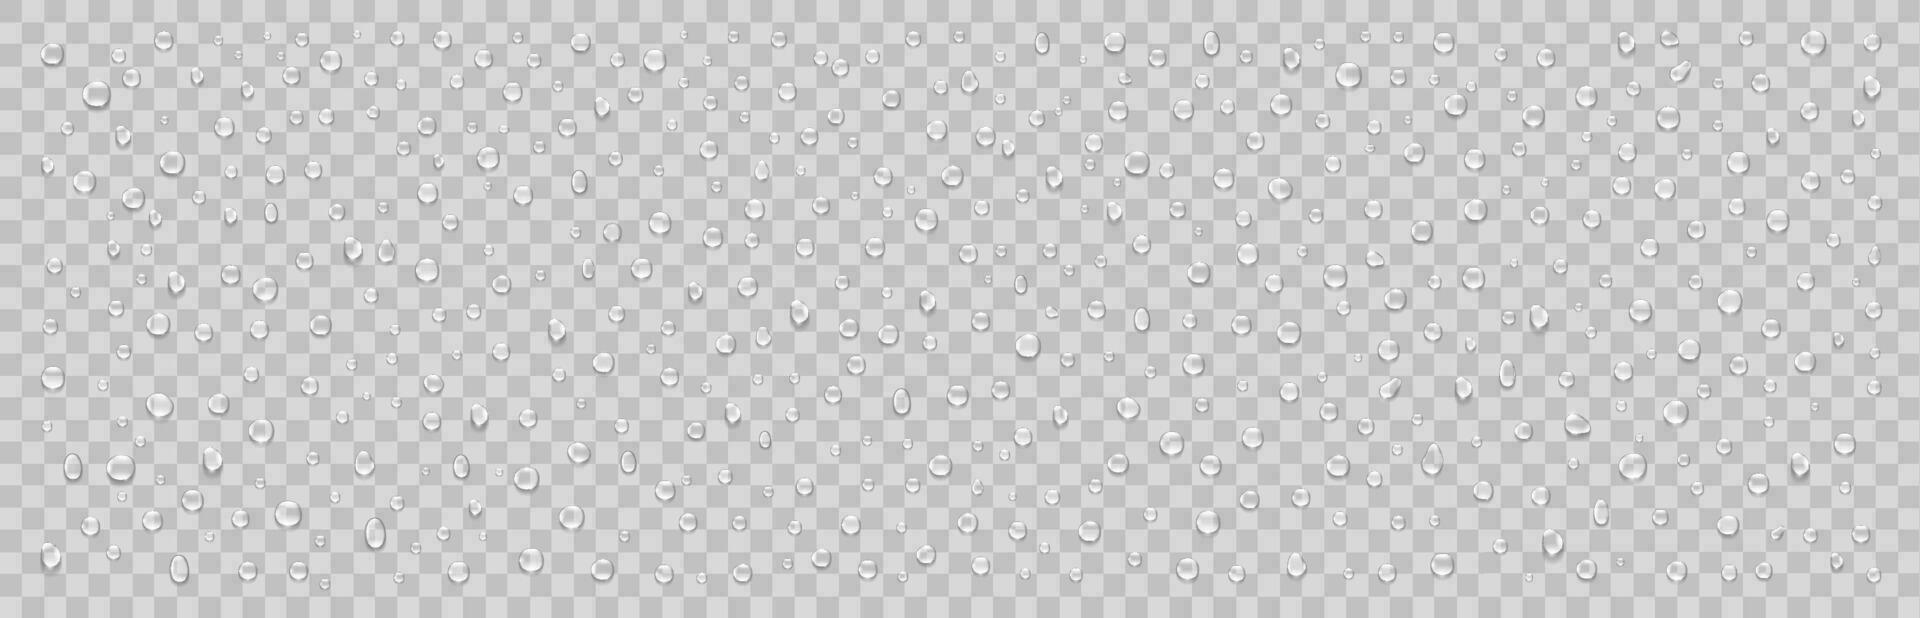 Realistic water drops isolated vector illustration set.